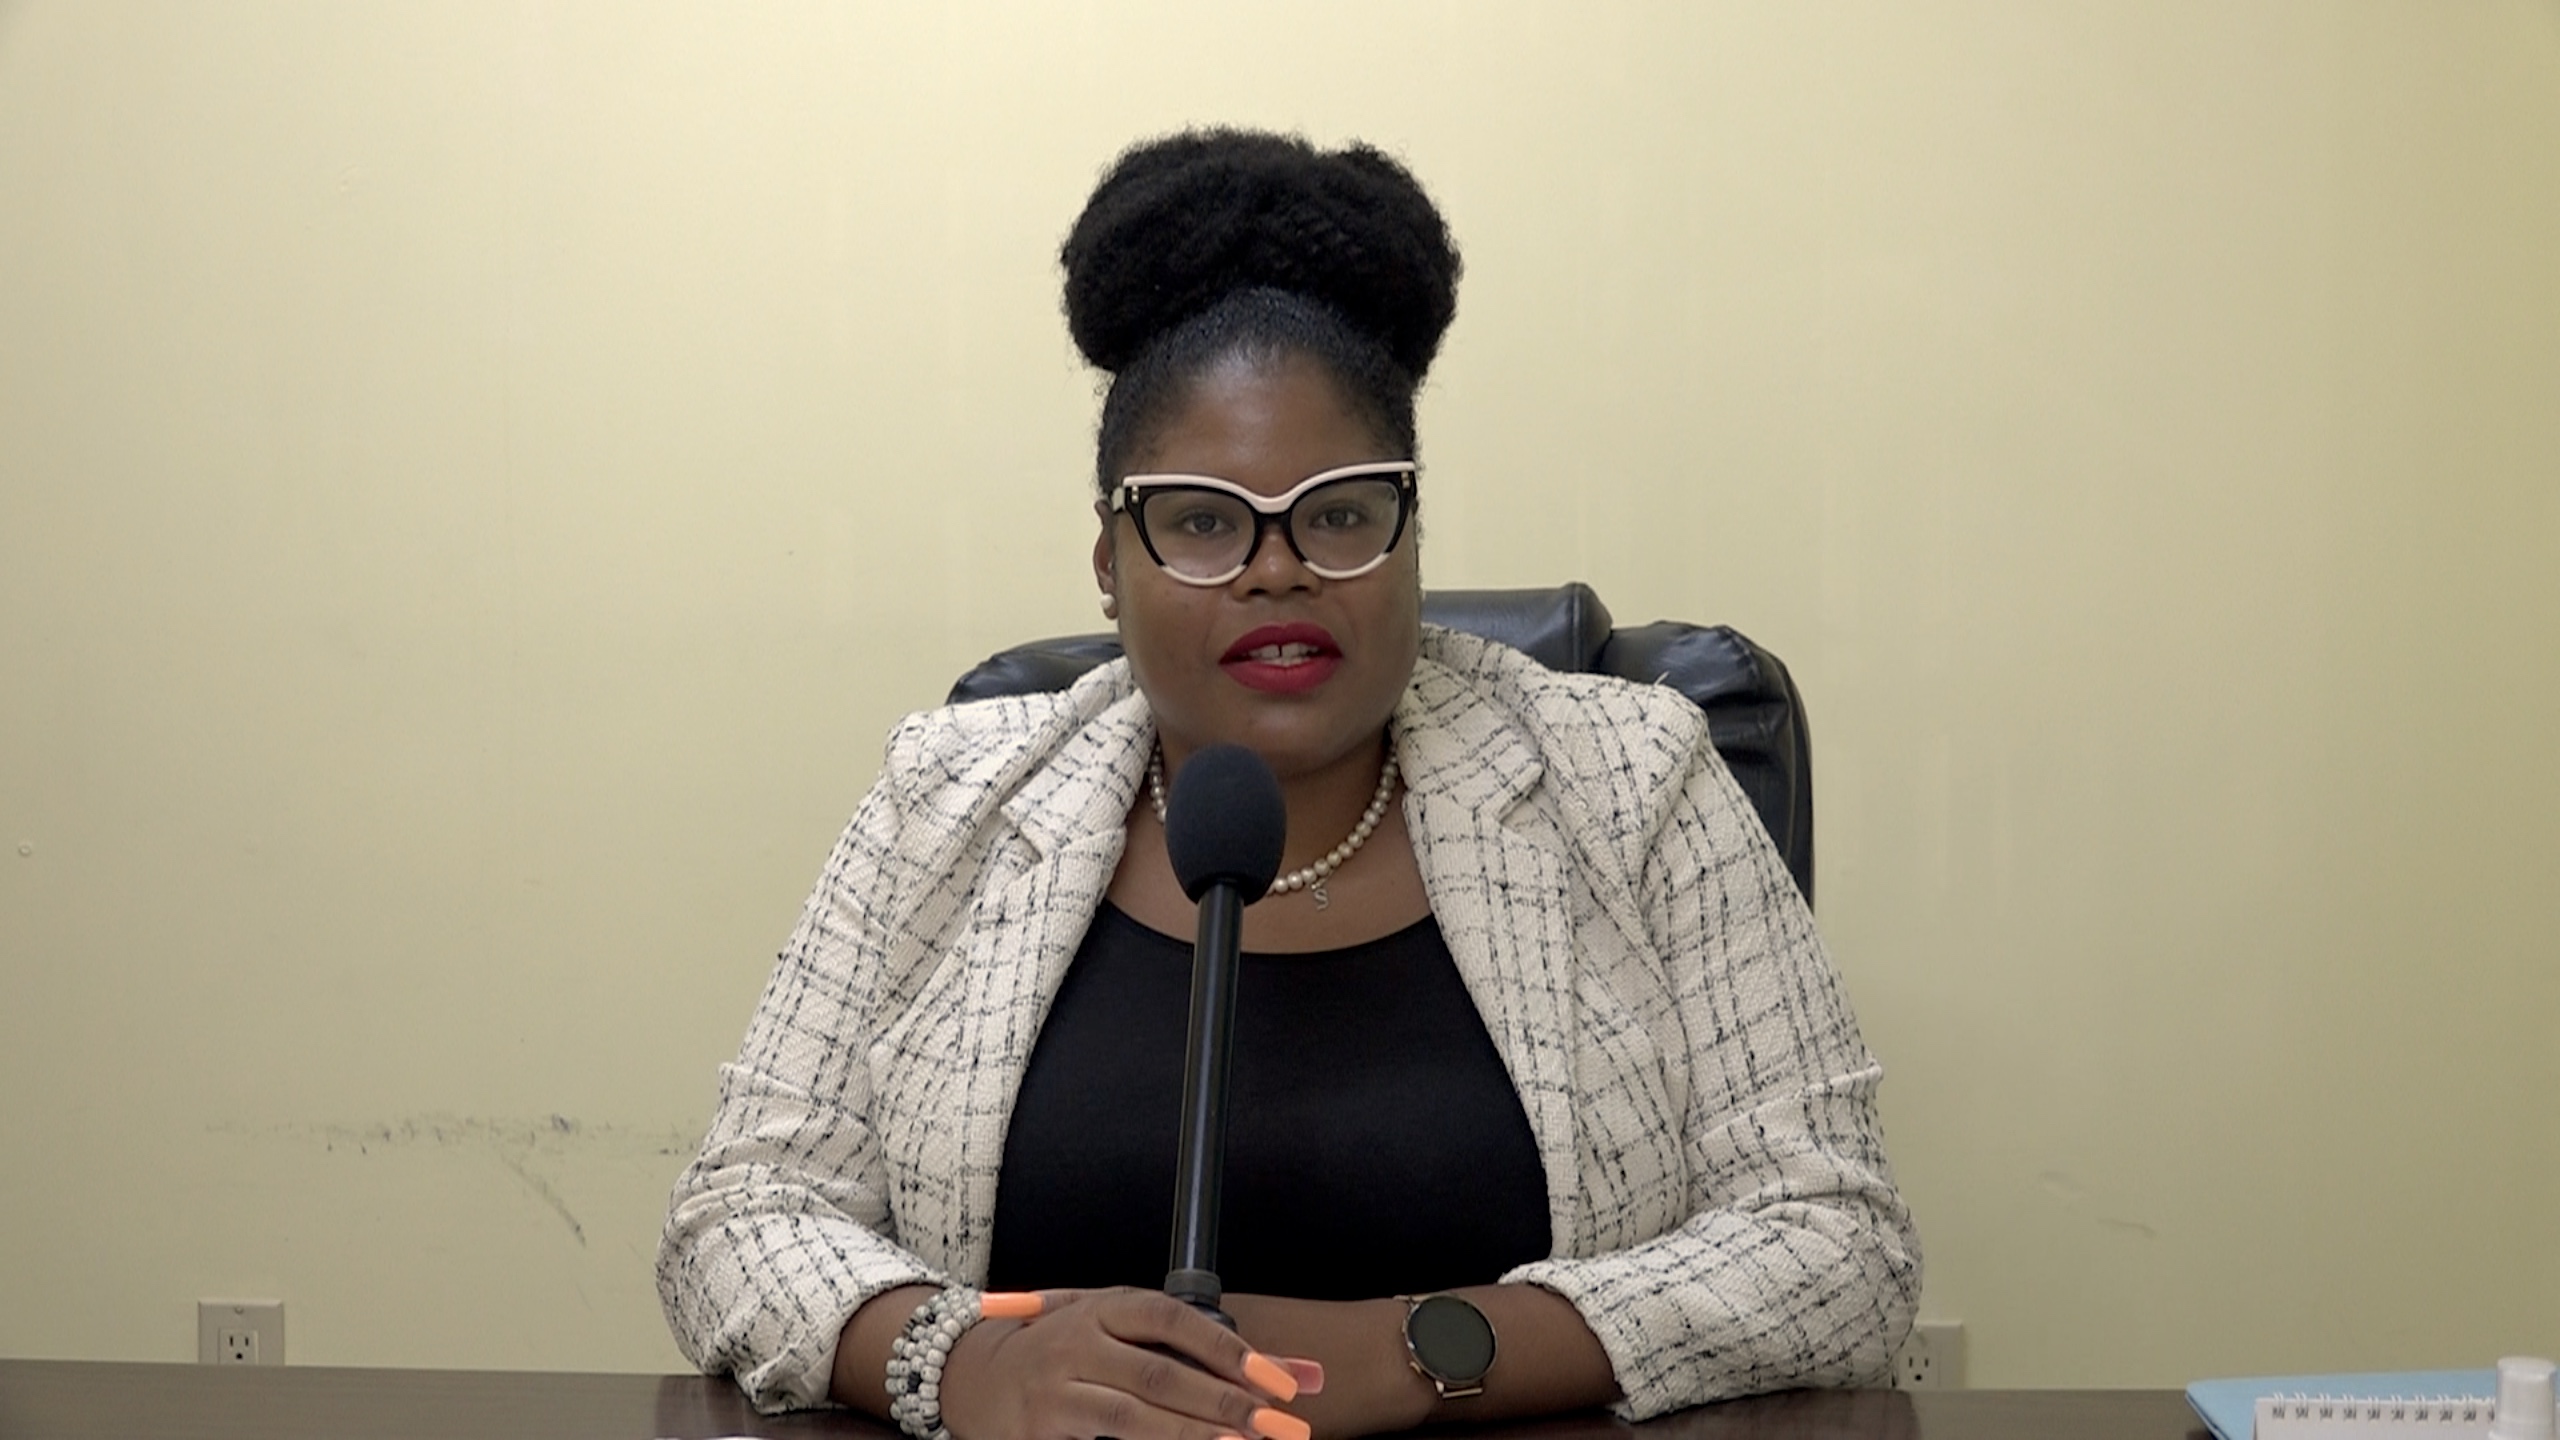 Ms. Shaniele Skeete, Senior Labour Officer at the Department of Labour in Nevis